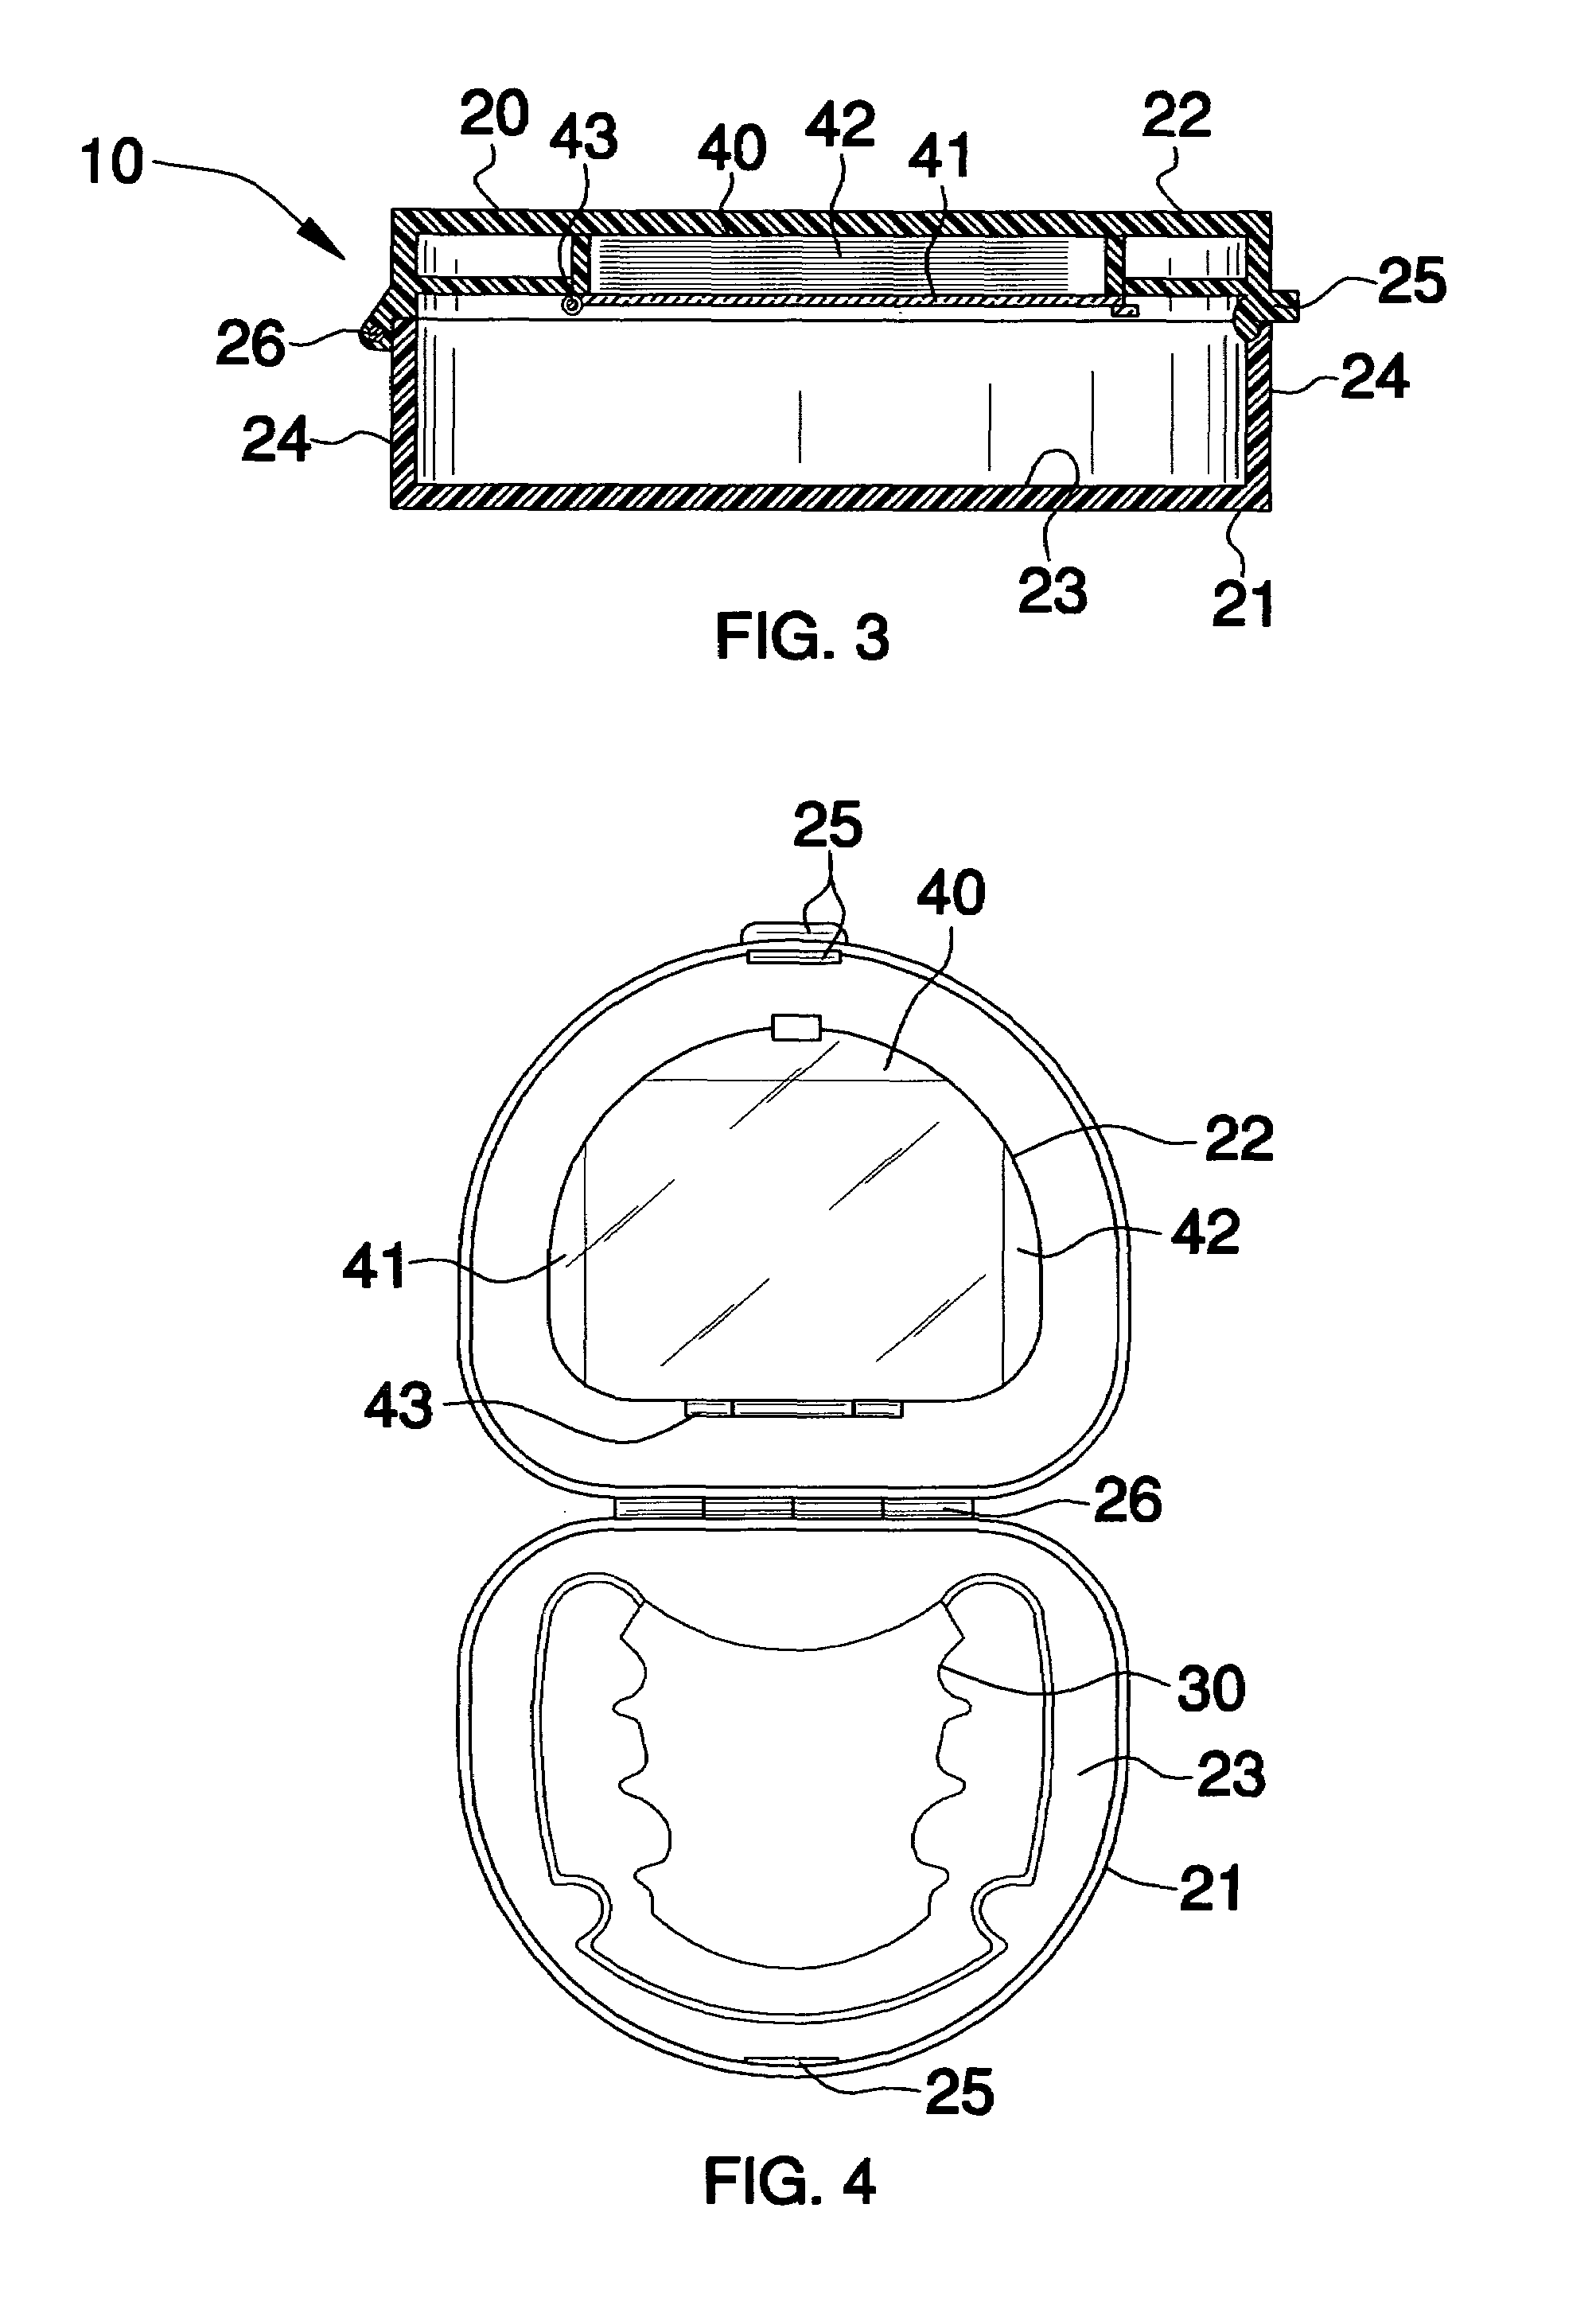 Oral care device portable apparatus with sanitizing towelettes